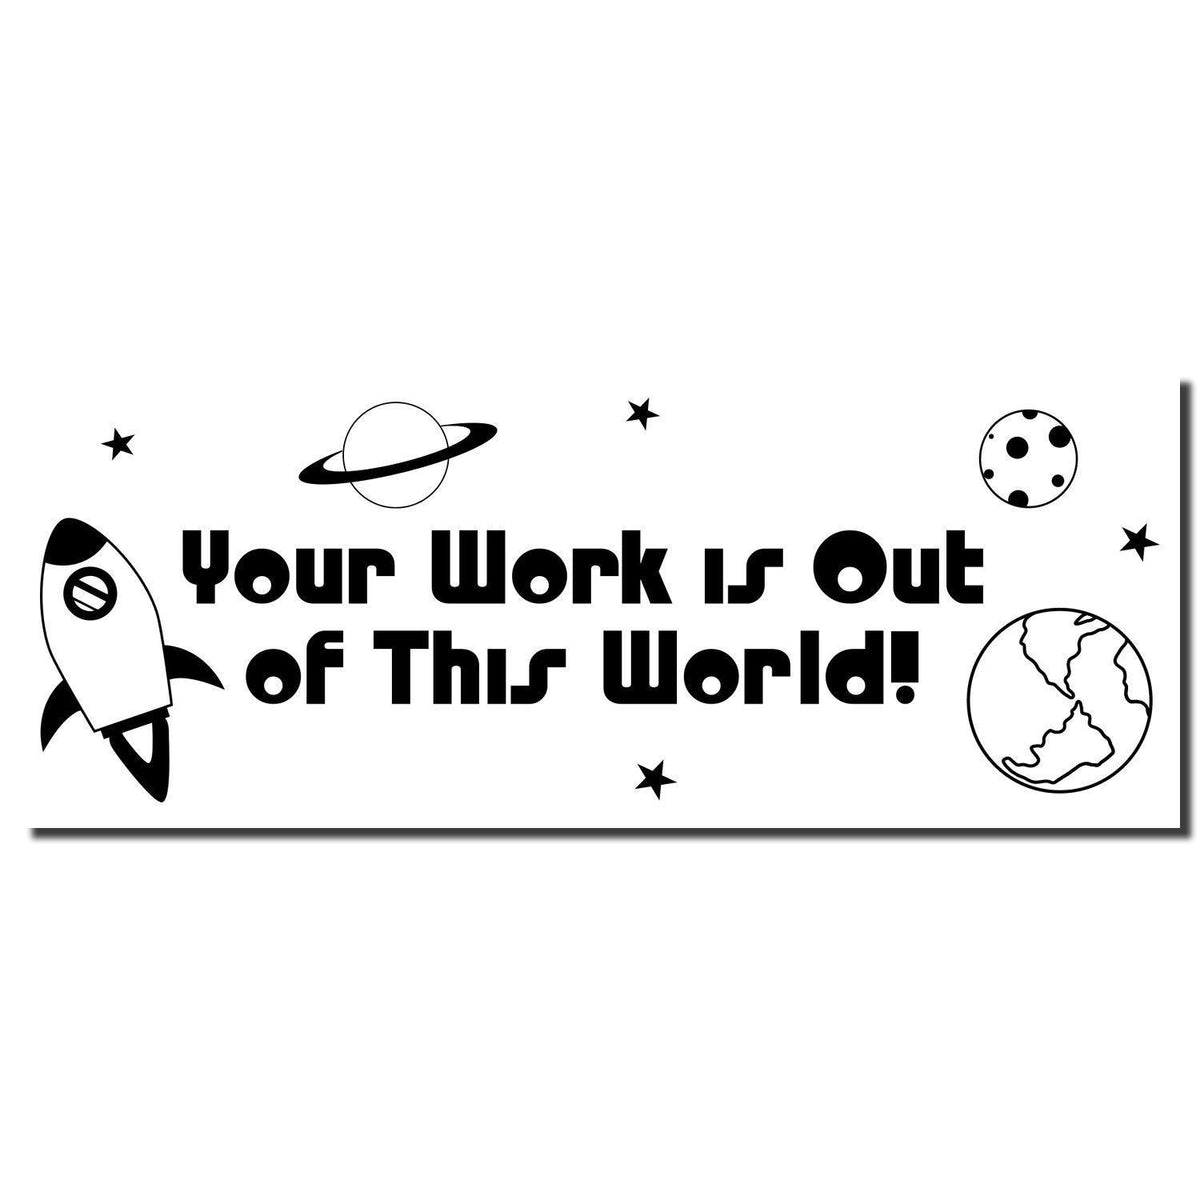 Enlarged Imprint Large Pre-Inked Your Work is Out of this world Stamp Sample